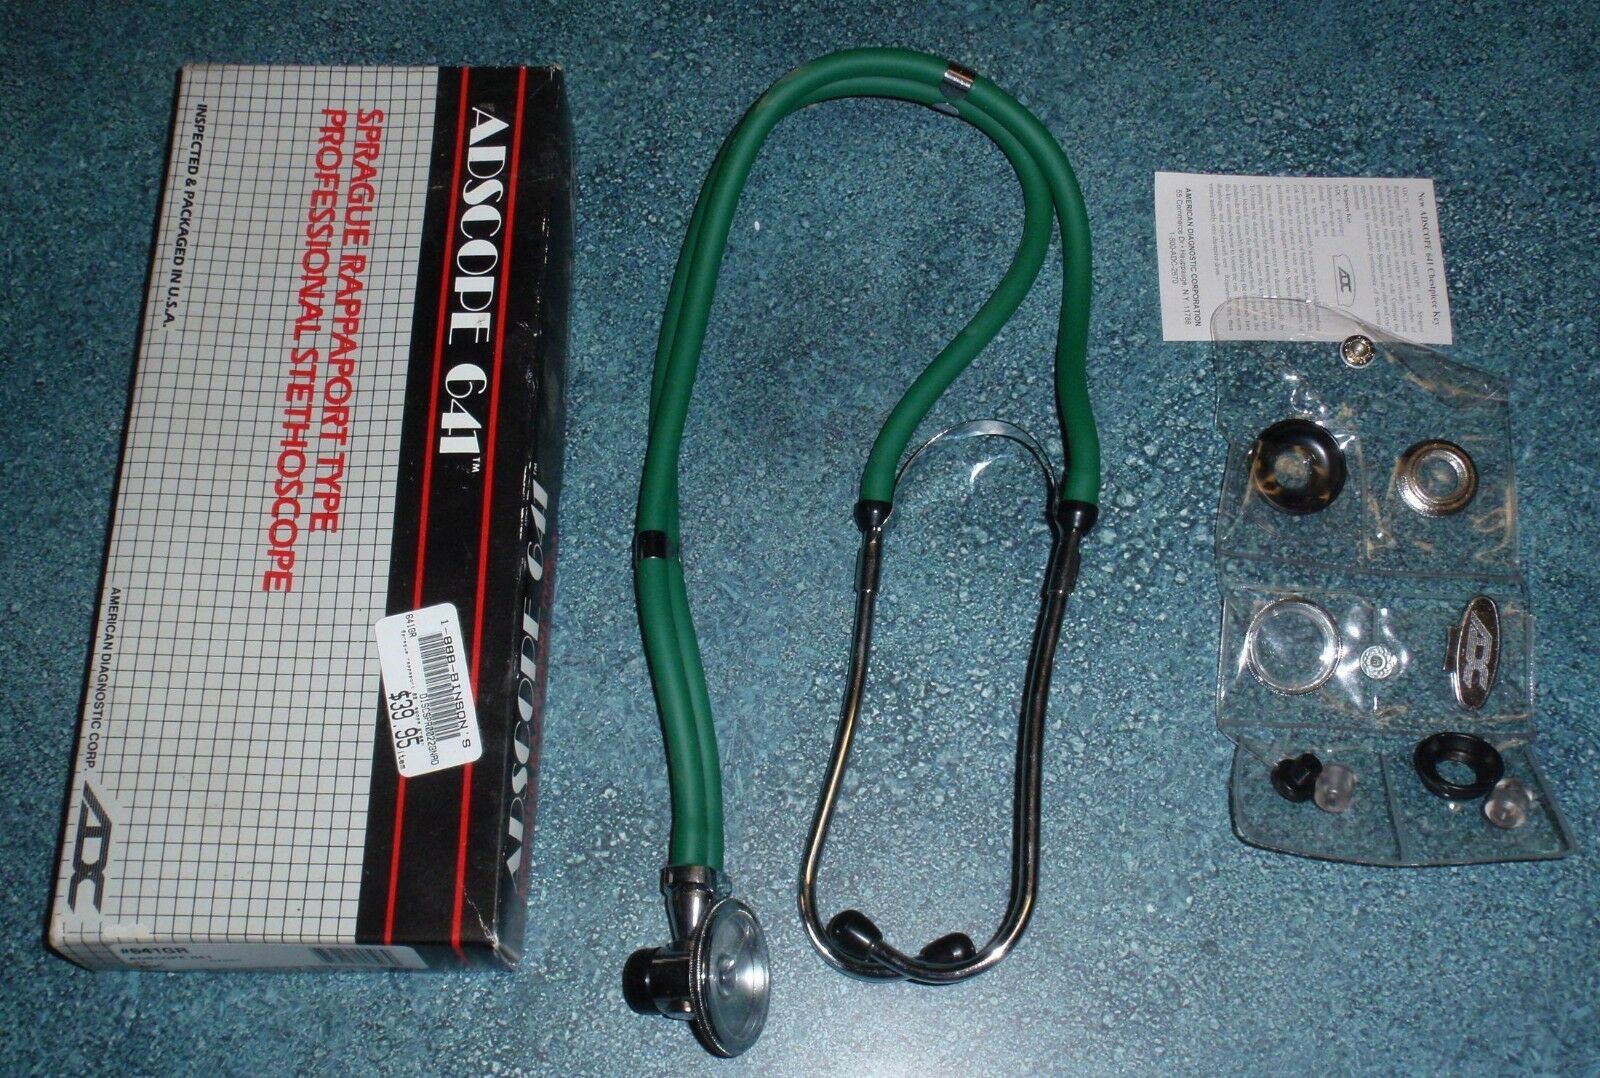  NEW Adscope 641 Sprague Rappaport Stethoscope In Green - FAST SHIPPING!  - $13.57